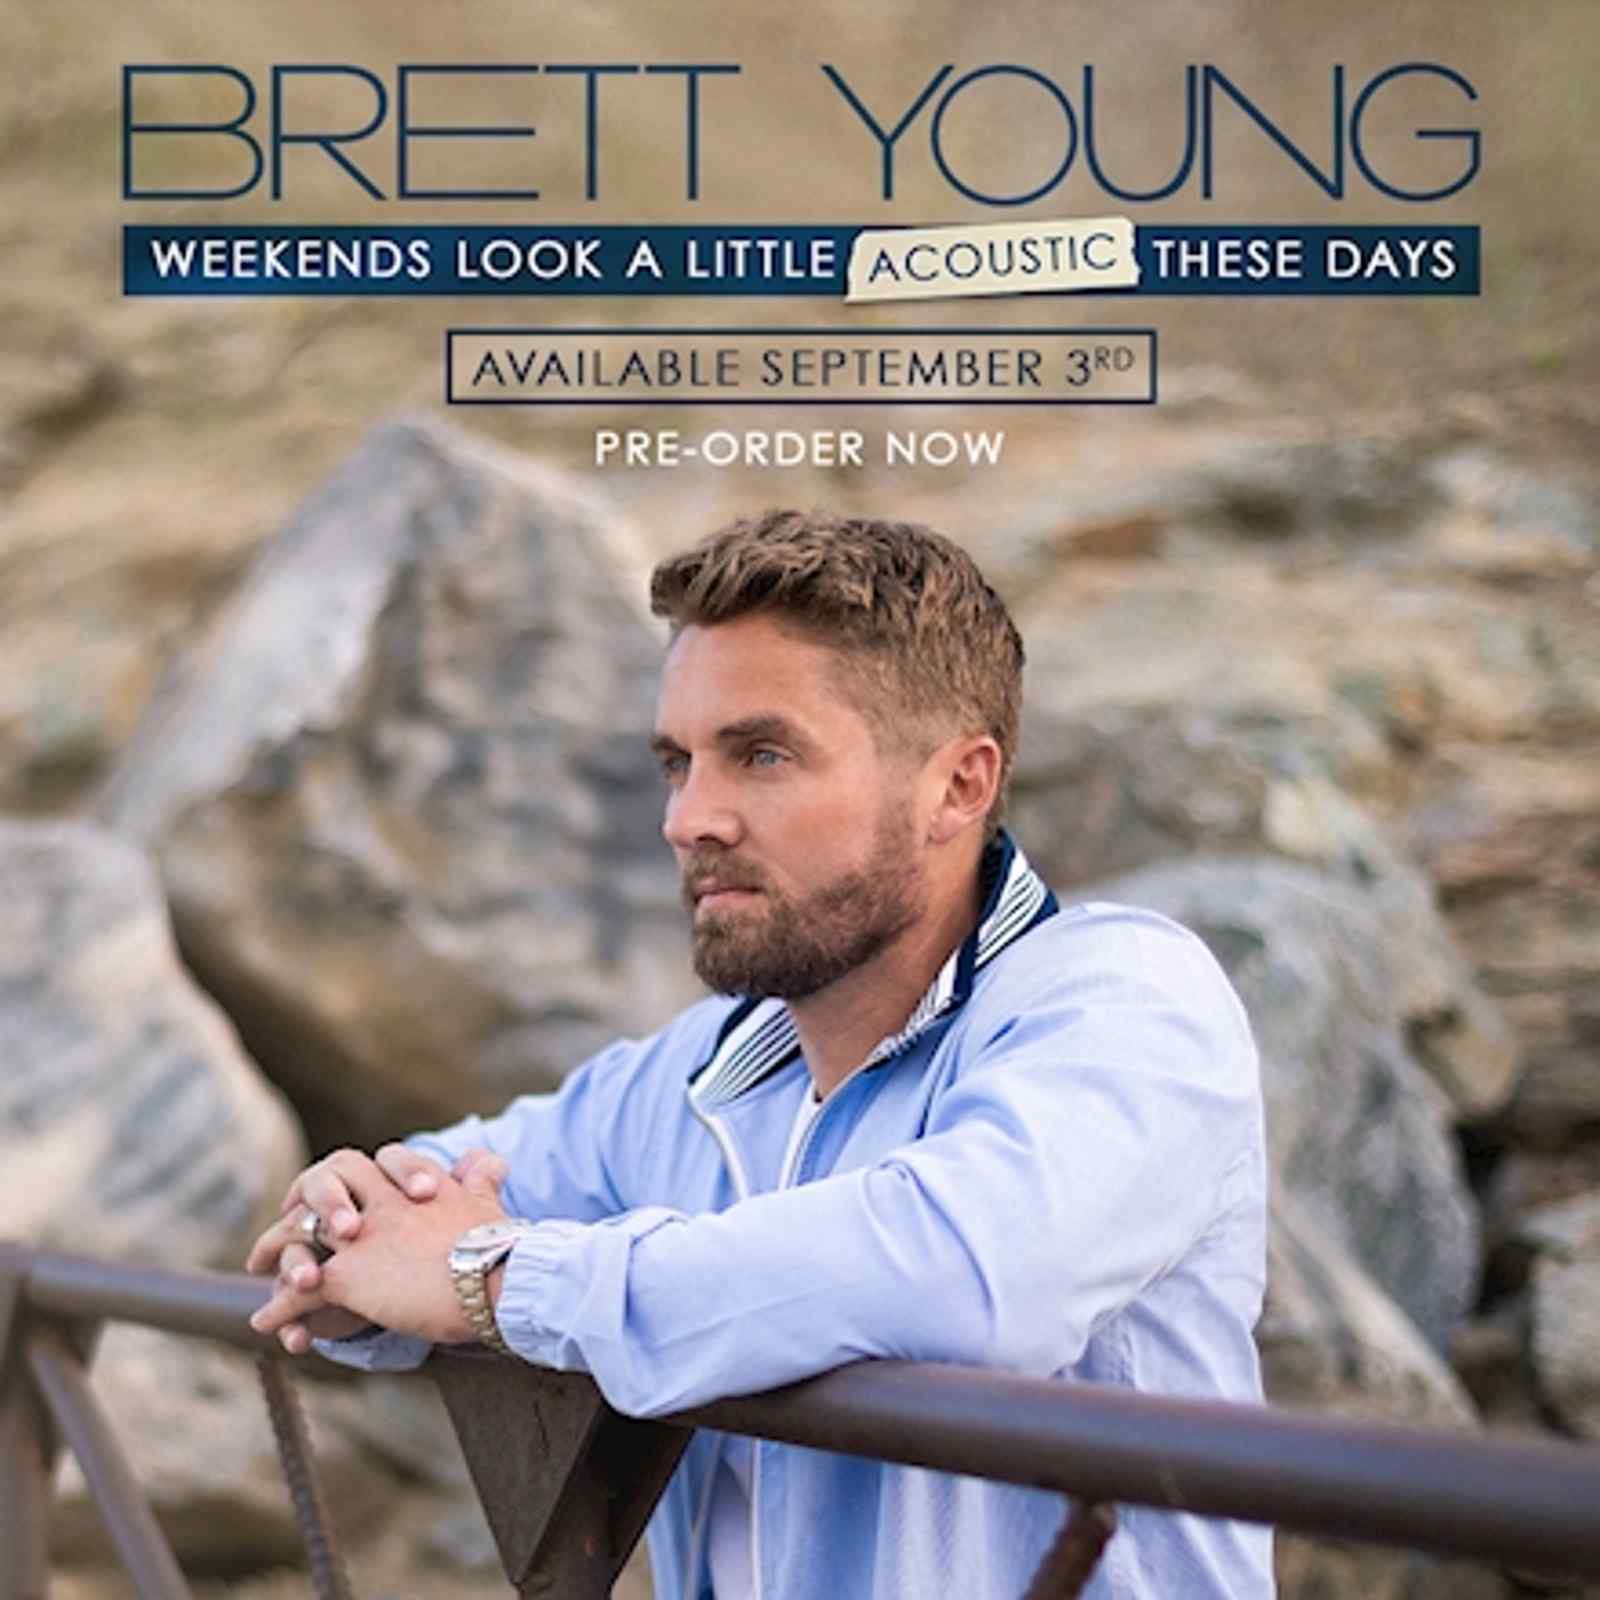 Weekends Look A Little Acoustic These Days by Brett Young